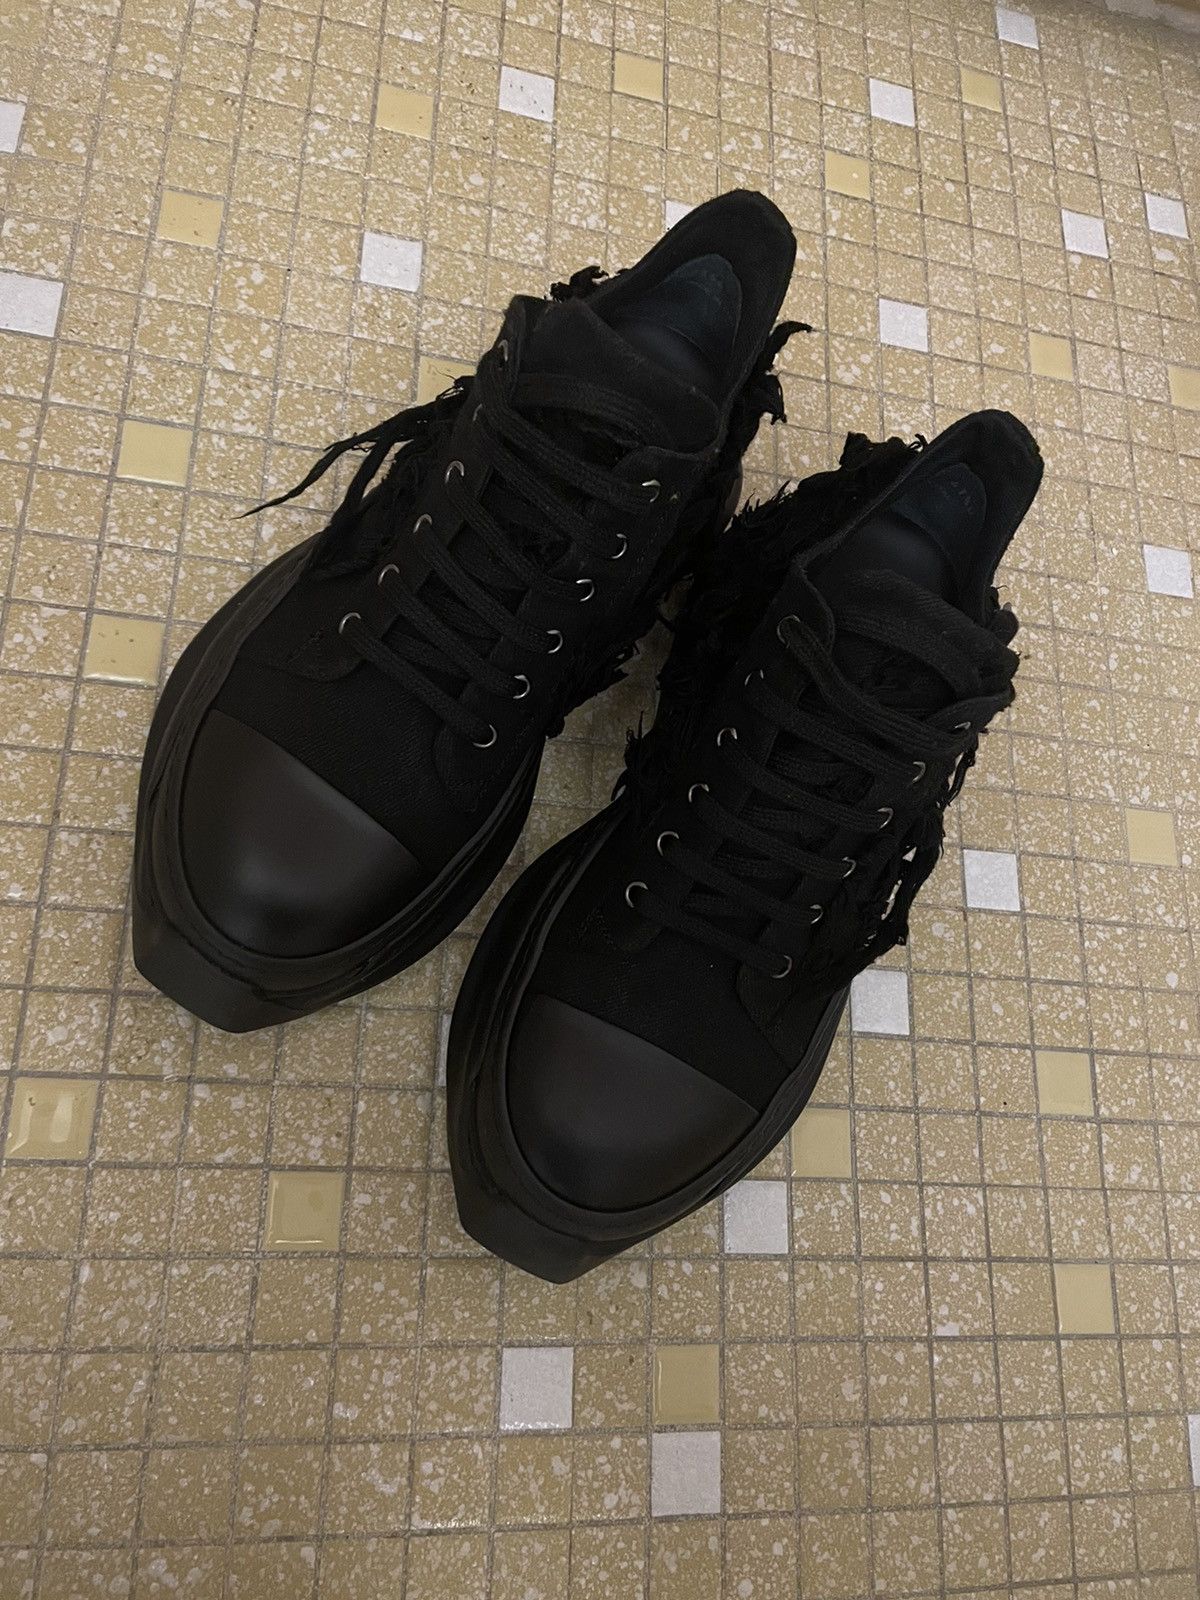 Rick Owens Rick Owens Black Distressed Abstract lows | Grailed